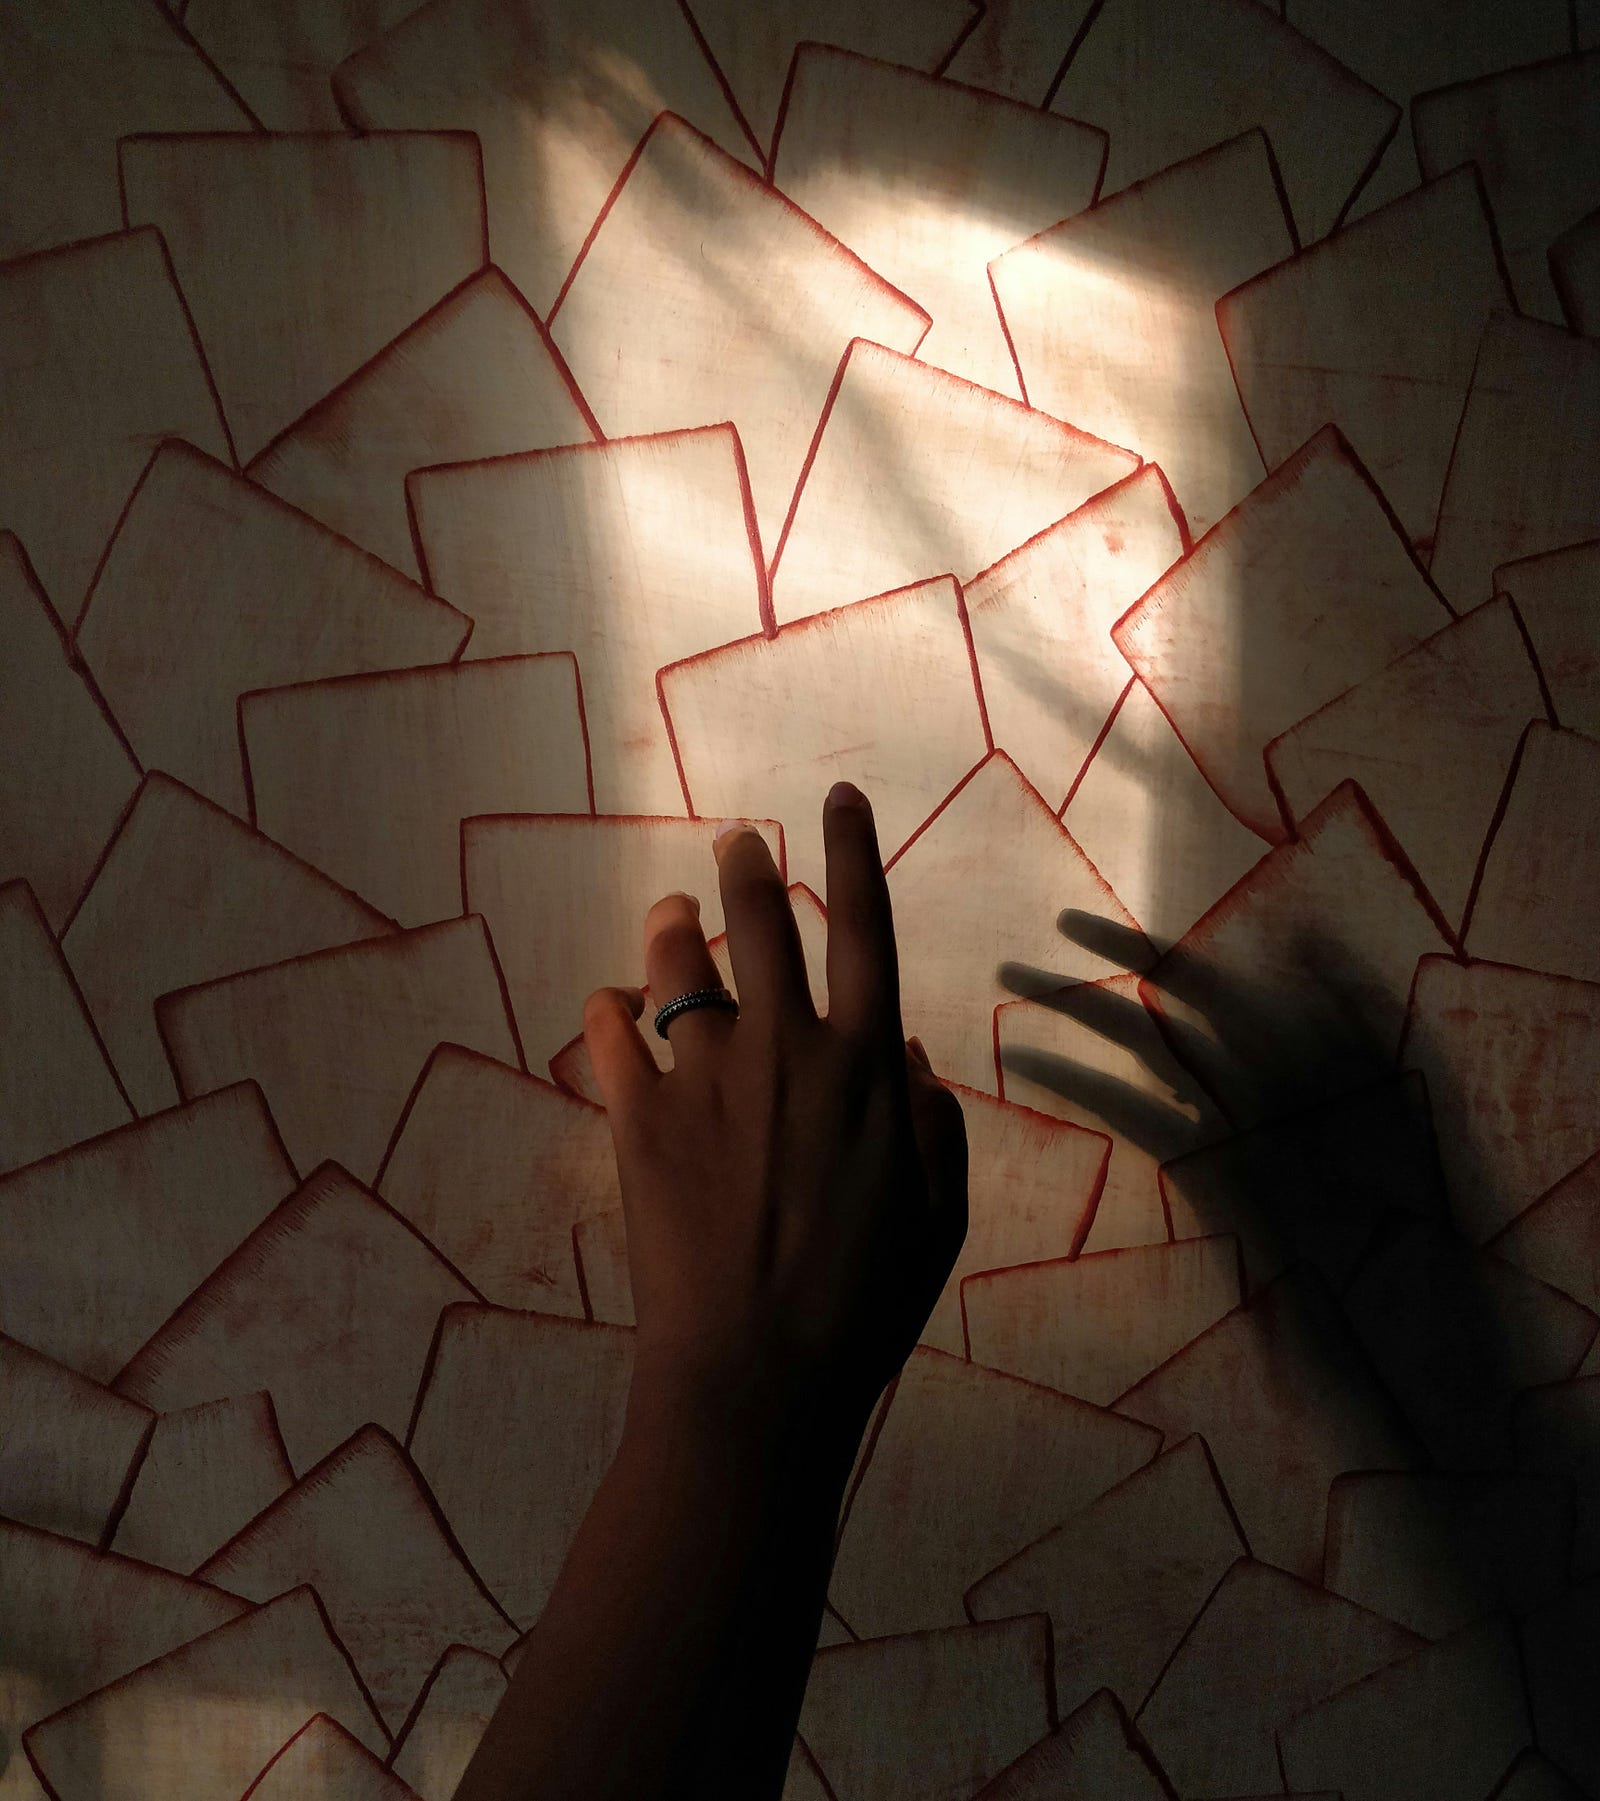 Two hands reach towards a wall of overlapping squares.